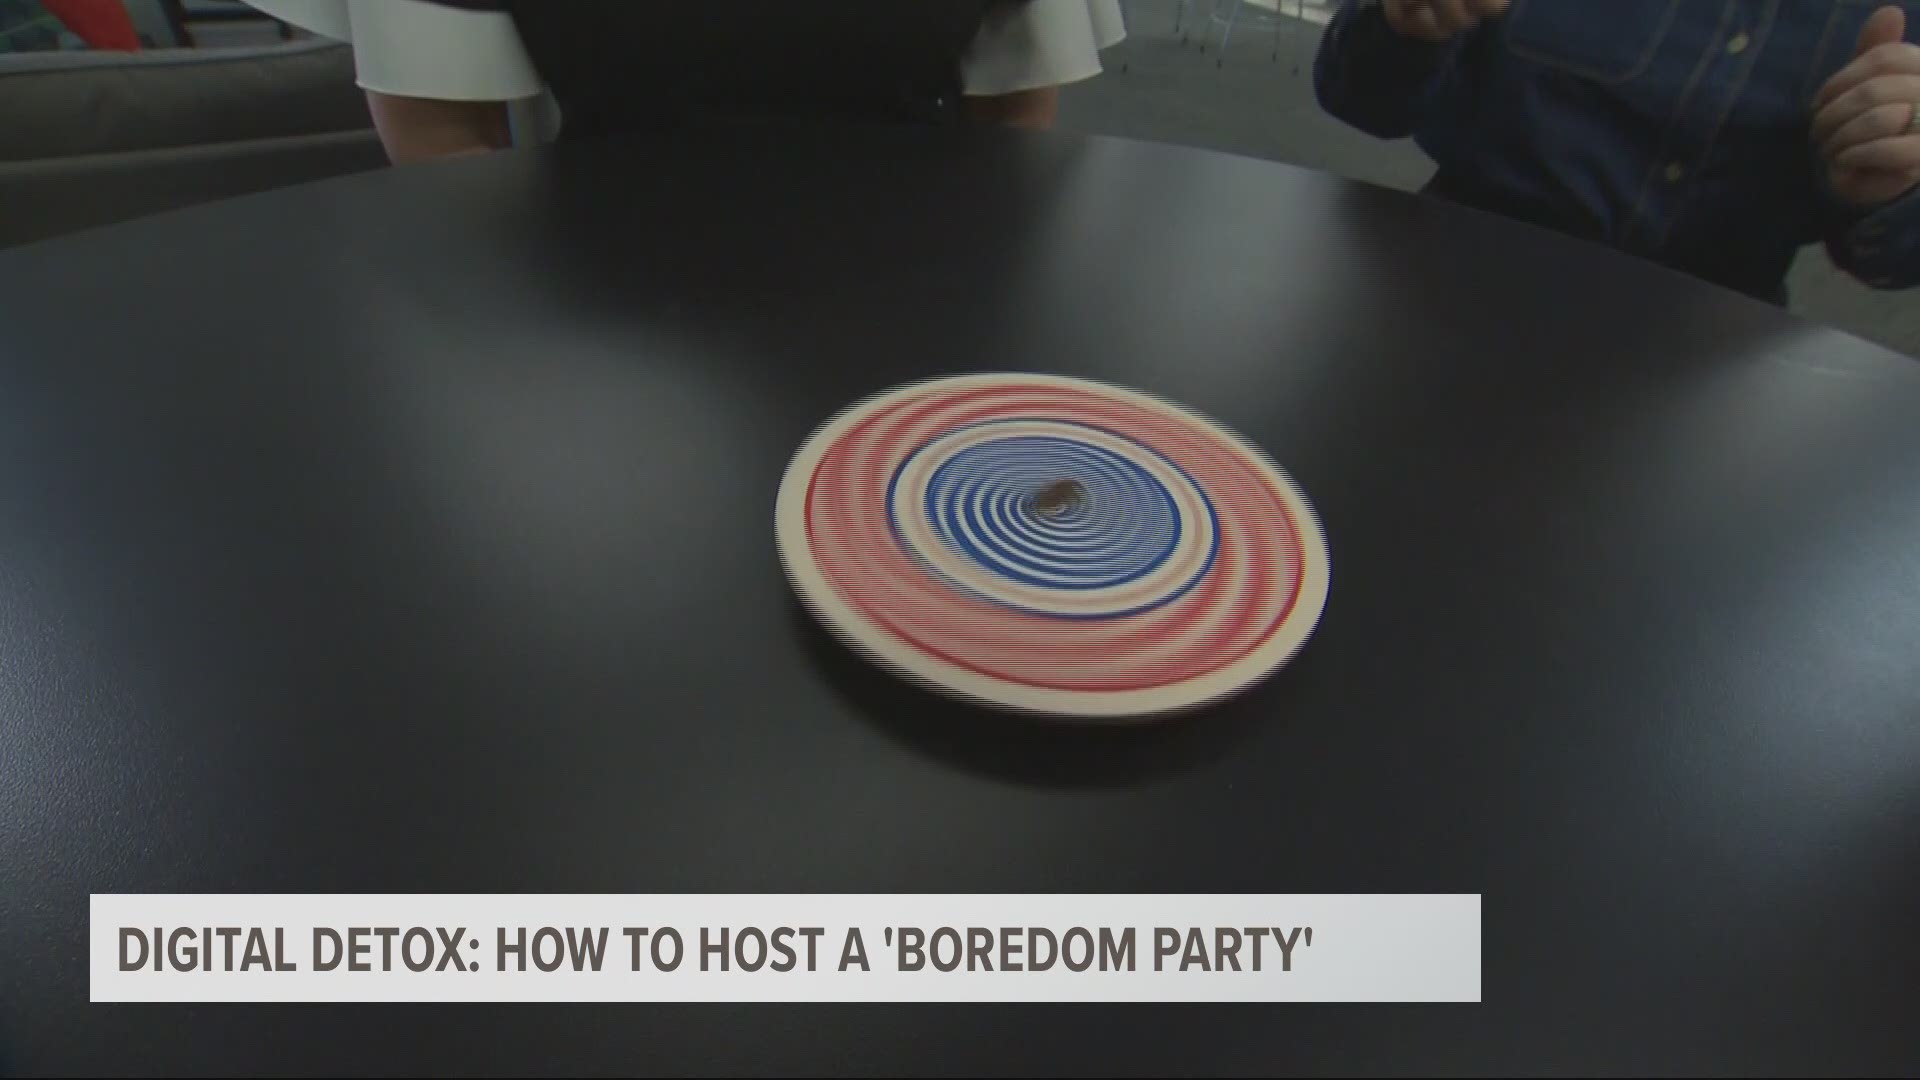 Nationally-known Portland psychologist and tech addiction expert Dr. Doreen Dodgen-Magee teaches why all of us need to better tolerate boredom & awkwardness.